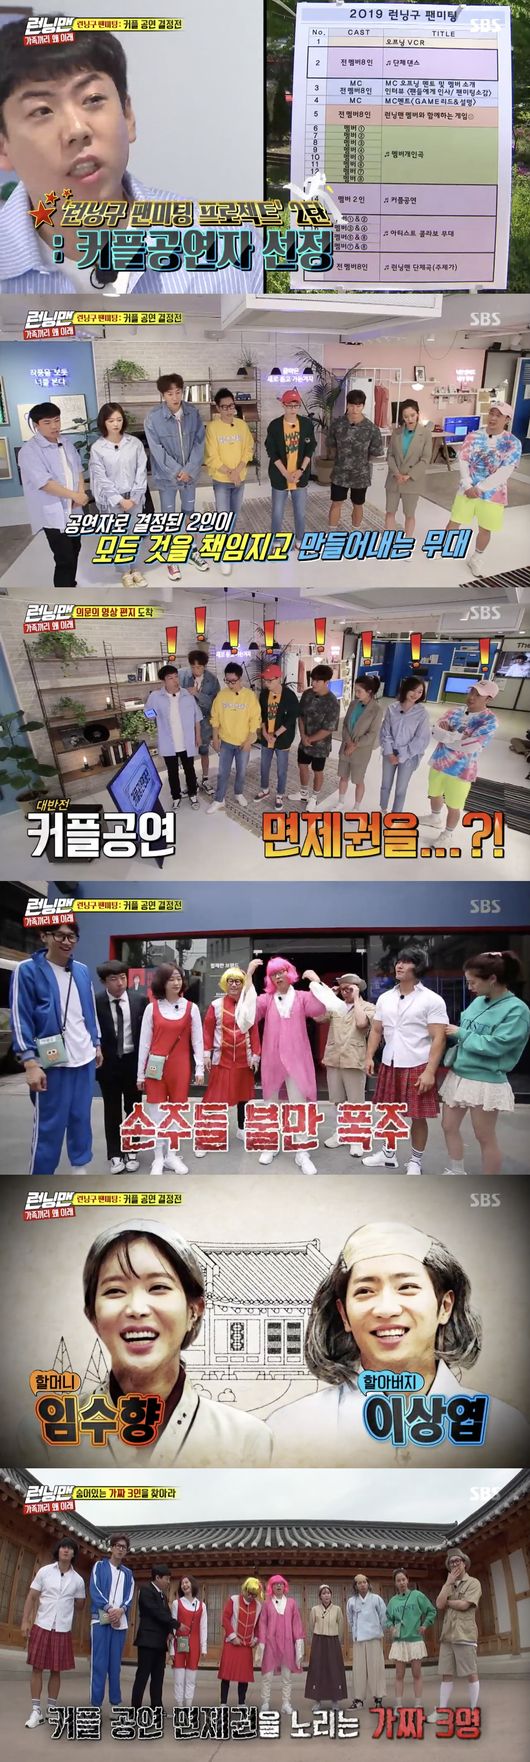 <p> Haha and Yoo Jae-Suk is Love Without Love (Live at Summer Vacation/08 in a couple of performances to unfold.</p><p>The past 26 days broadcast SBS Running Manin the 9-anniversary of Love Without Love (Live at Summer Vacation/08 Project 2 shots, a couple performances selected as the race unfolded.</p><p>Love Without Love (Live at Summer Vacation/08-unfold the couples performances are produced with the intervention and, at a minimum, the cost of the show as they all would be responsible and that you need to create performances. This example is members of the penalties and to avoid each other. Couple gig waiver this time, the race Members 8 grandchildren become grandparents in a couple waiver that they must accept.</p><p>First, the members of longevity and life, from the girl group, Girls, history, wrestling, athlete, lawyer, zookeeper, etc each of the various professions grandchildren. Unique costume dressed up as these are the Garosu-Gil Street and citizens, a big laugh.</p><p>This day Grandma and grandpa as Im Soo-hyang and Lee Sang-Yeob has emerged. These are the grandchildren are 8, not 5and a fake 3 people have said. With the final hand Week 1 and the final hand that a fake two of you already know said. This race is a real grandchildren and grandchildren are fake three out victory and a fake they get a grandchild to find out to win in a manner that progress was.</p><p>Team Water Bomb and a couple performances Confirm receive to say that members are to avoid this the harder the game participate in. Grandfather team and grandma team is divided into members is fake and get hands on hint to receive a food name stomp off, mystery words and various games were in progress.</p><p>Final hand, this light was and hints are absolutely insufficient for the situation in the last mission started. Fake grandchildren 1 out real grandchildren team wins and the real grandchild 3 people out fake team wins in a manner that progress the last mission in the members of the fierce head fight unfolded.</p><p>Lee Kwang-Soo love from family photos to discover that grandparents a photo of this adorable, Im Soo-hyang, this, not, real grandchildren and also 7 people you know. With says Fake 3 fake grandchild three people, not fake grandparents this cute, Im Soo-hyang and the fake hand one of the members was to be. This member is Im Soo-hyang and Lee Sang-Yeob of the name tag is removed and finally the fake hand after than before min and not narrowed but not decided.</p><p>Eventually the final hand owner Lee Kwang-Soo is one of the fake grandchild is their choice and one of the name tags off. To fake grandchild was beaten and eventually to a couple of performances to participate in. Also with a couple performances opponents that the decision was decided and finally Yoo Jae-Suk winning no.</p><p>Today is 7 March in the country held a massive Love Without Love (Live at Summer Vacation/08 from Yoo Jae-Suk and HaHa which couple the stage to unfold, but already expectations are collected. [Photo] Running Man broadcast screen capture</p><p> Running Man broadcast screen capture</p>